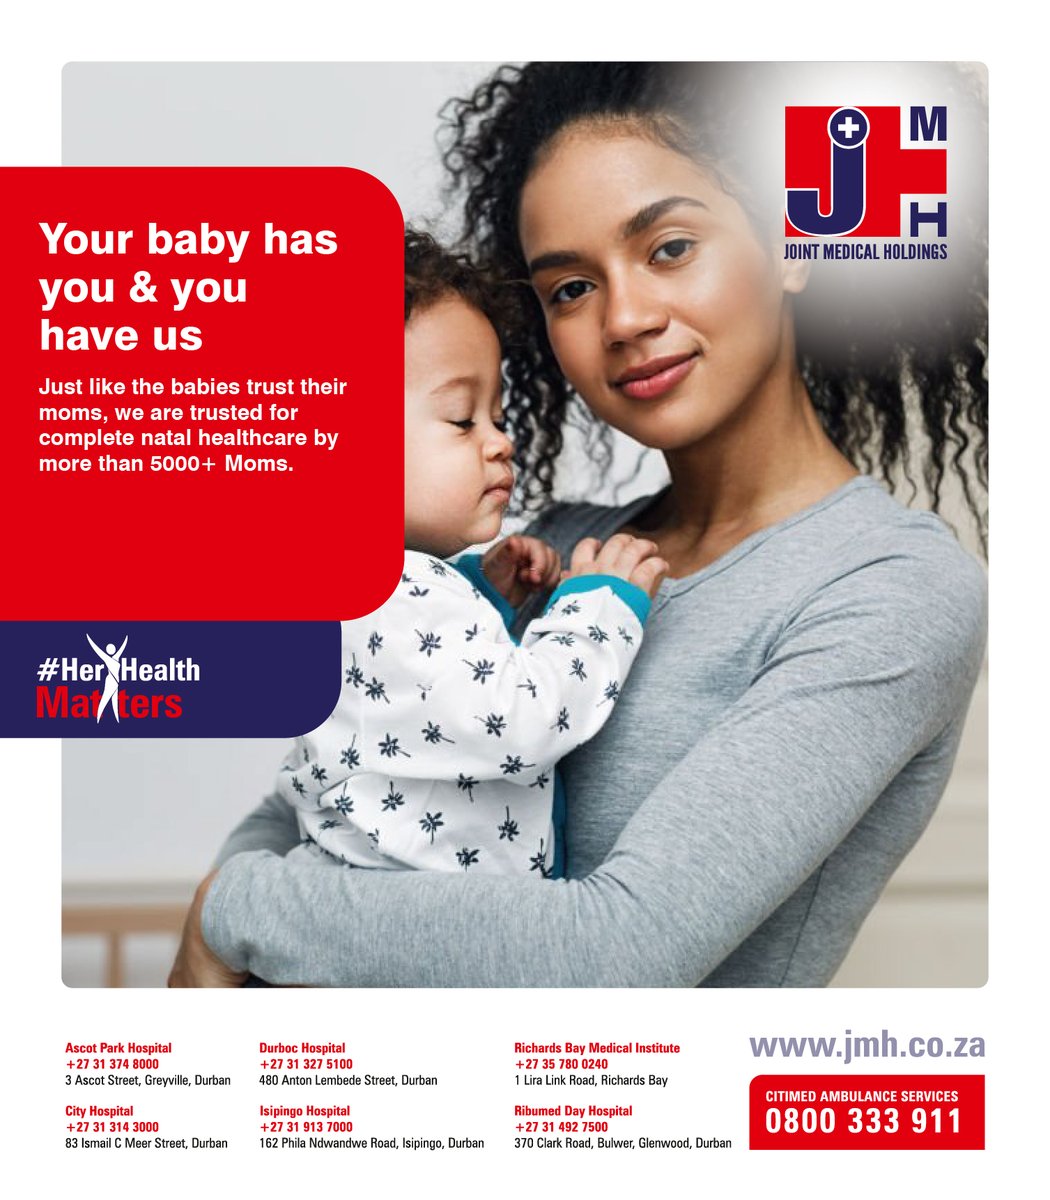 You've planned to bring the tiniest bundle of joy to the world. Similarly, JMH has planned to provide you with the best natal healthcare facilities.

For more information, visit: - jmh.co.za

#HerHealthMatters #JMH #JointMedicalHoldings #Strongwomen #Healthcare